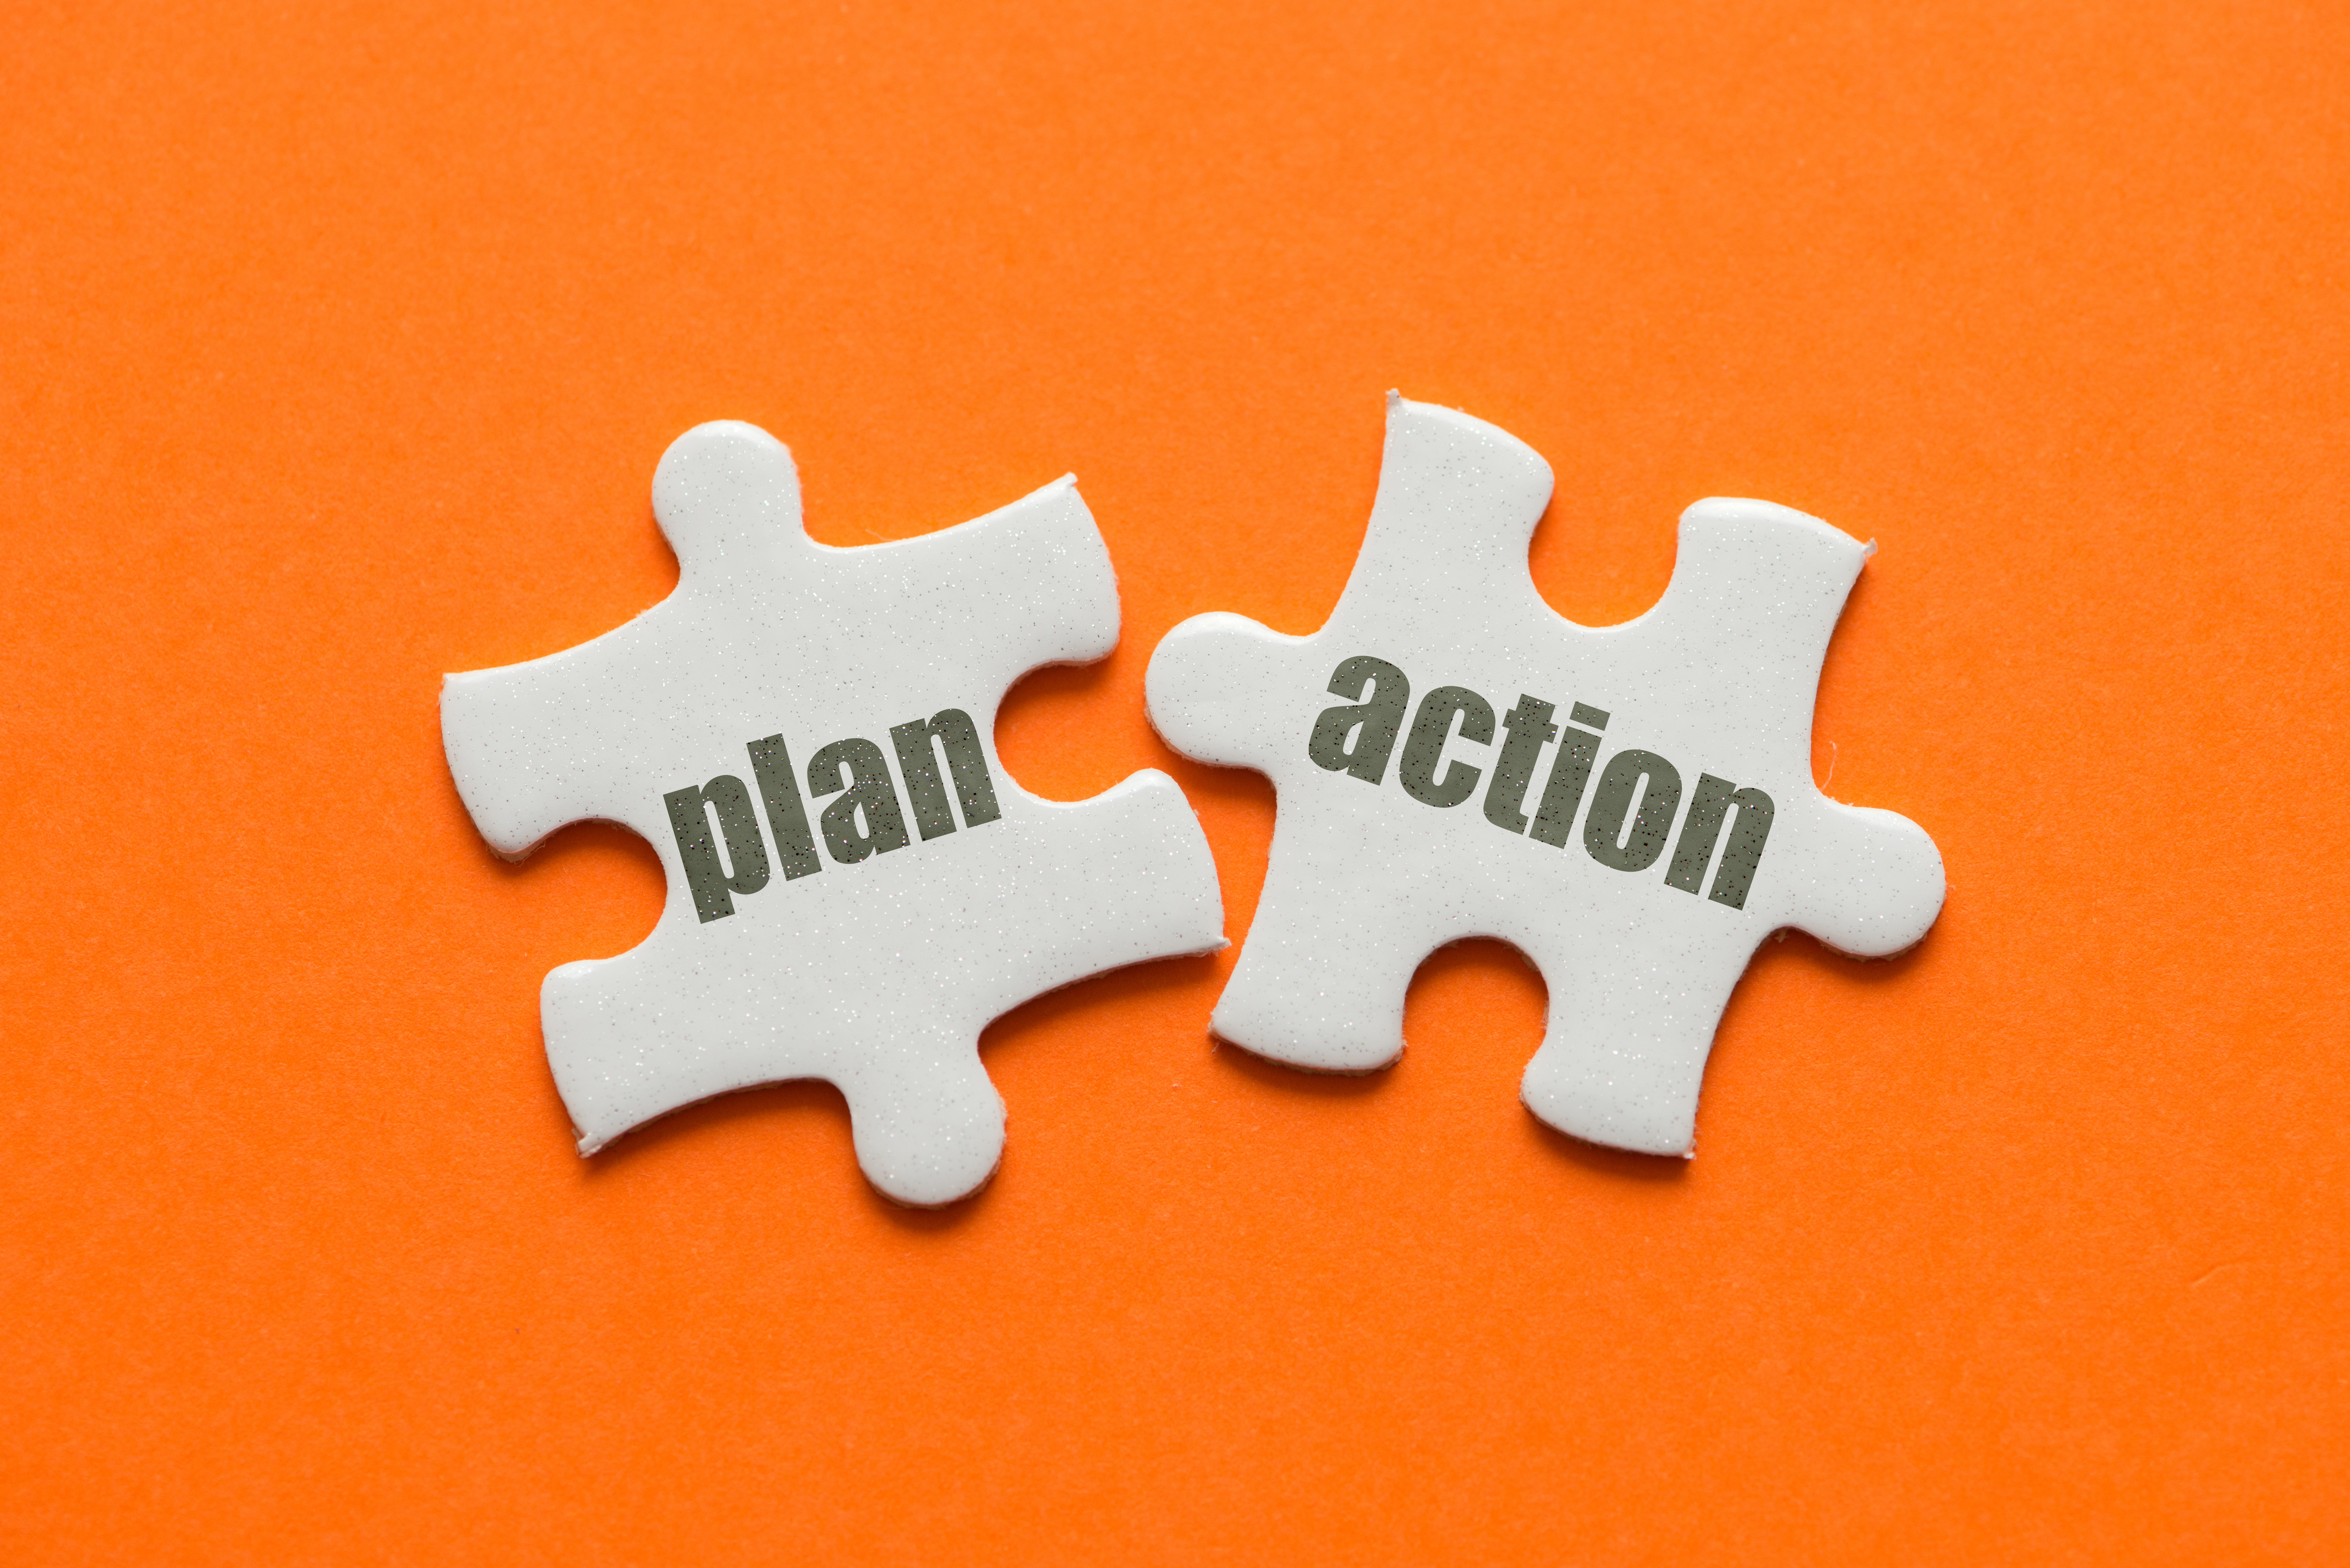 The word Plan Action on two matching puzzle on orange background.